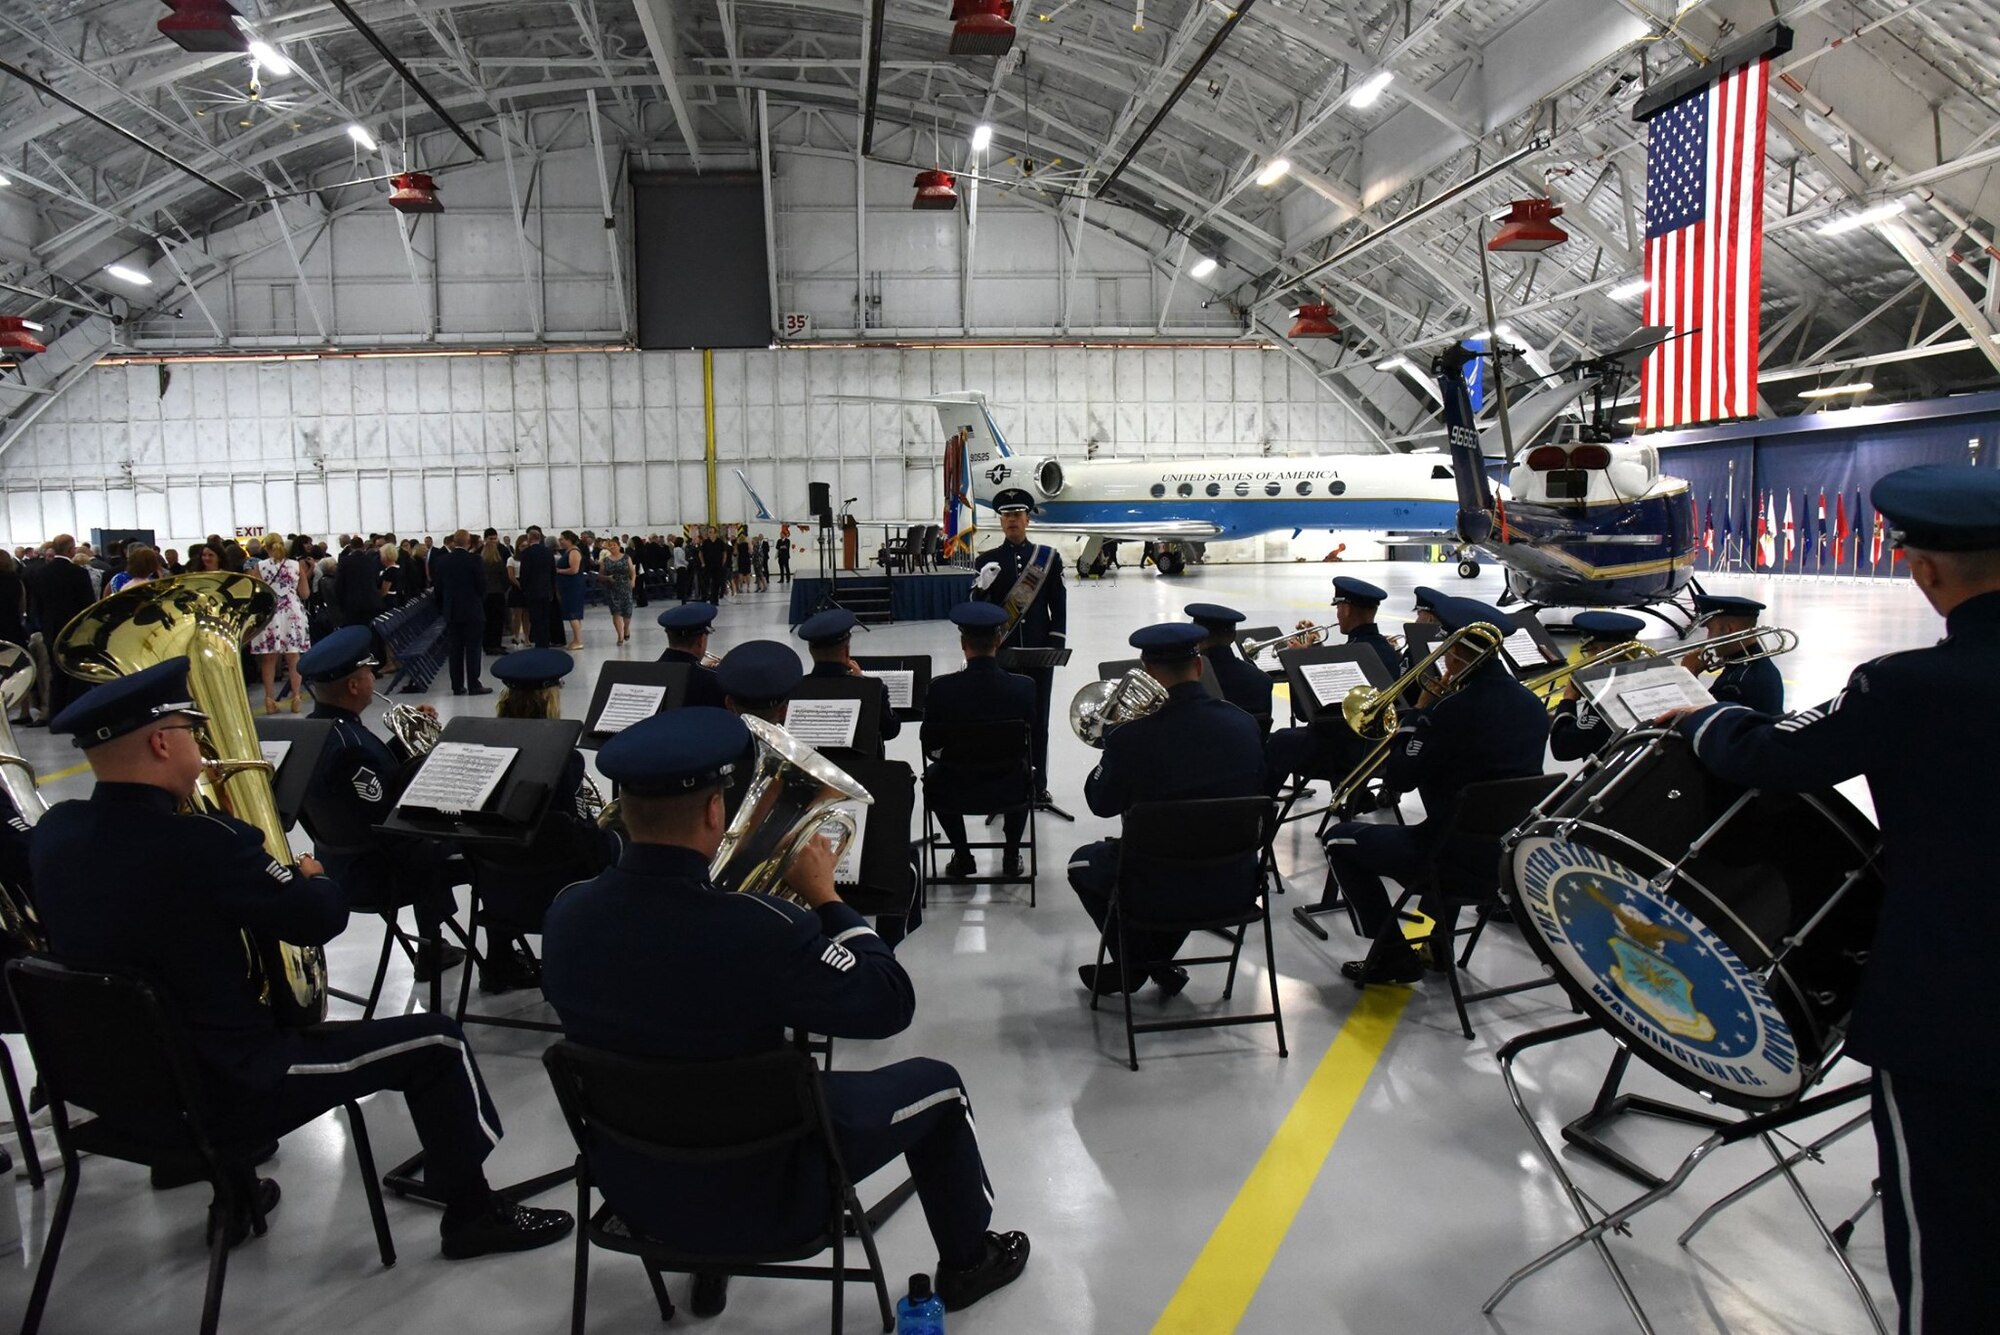 The The United States Air Force Band plays an opening medley before the retirement ceremony in honor of United States Air Force Gen. Paul J. Selva, Vice Chairman of the Joint Chiefs of Staff, at Joint Base Andrews Hangar 3. Selva, the 10th Vice Chairman of The Joint Staff, retires from the Air Force after more than 39 years of honorable service. (U.S. Air Force photo/James E. Lotz)